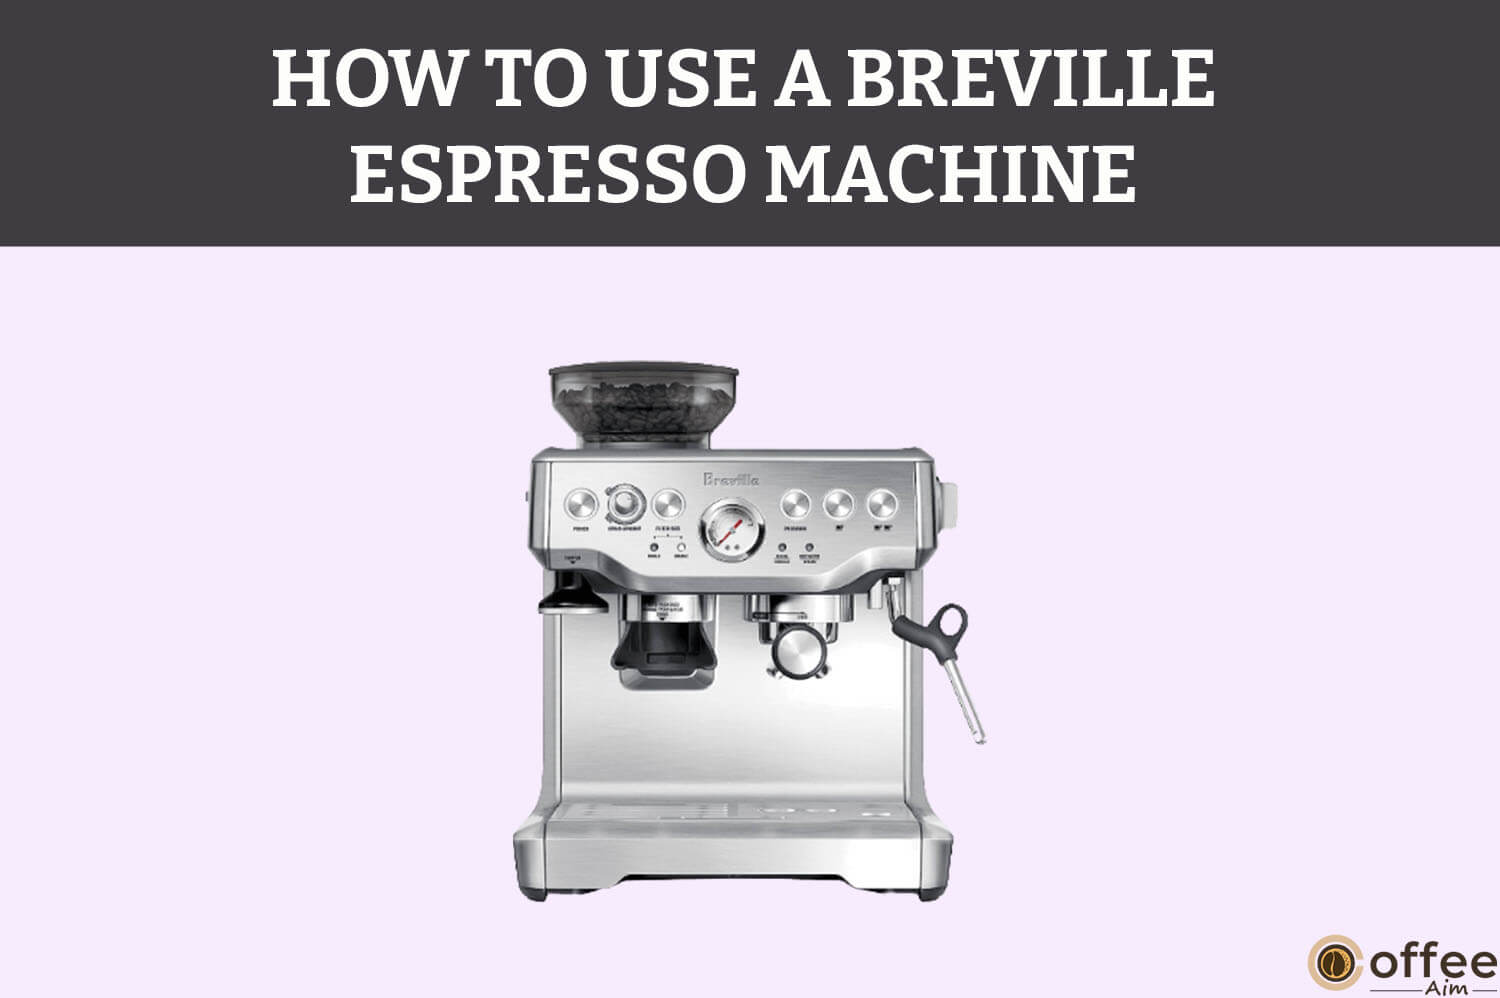 Featured image for the article "How to Use A Breville Espresso Machine"